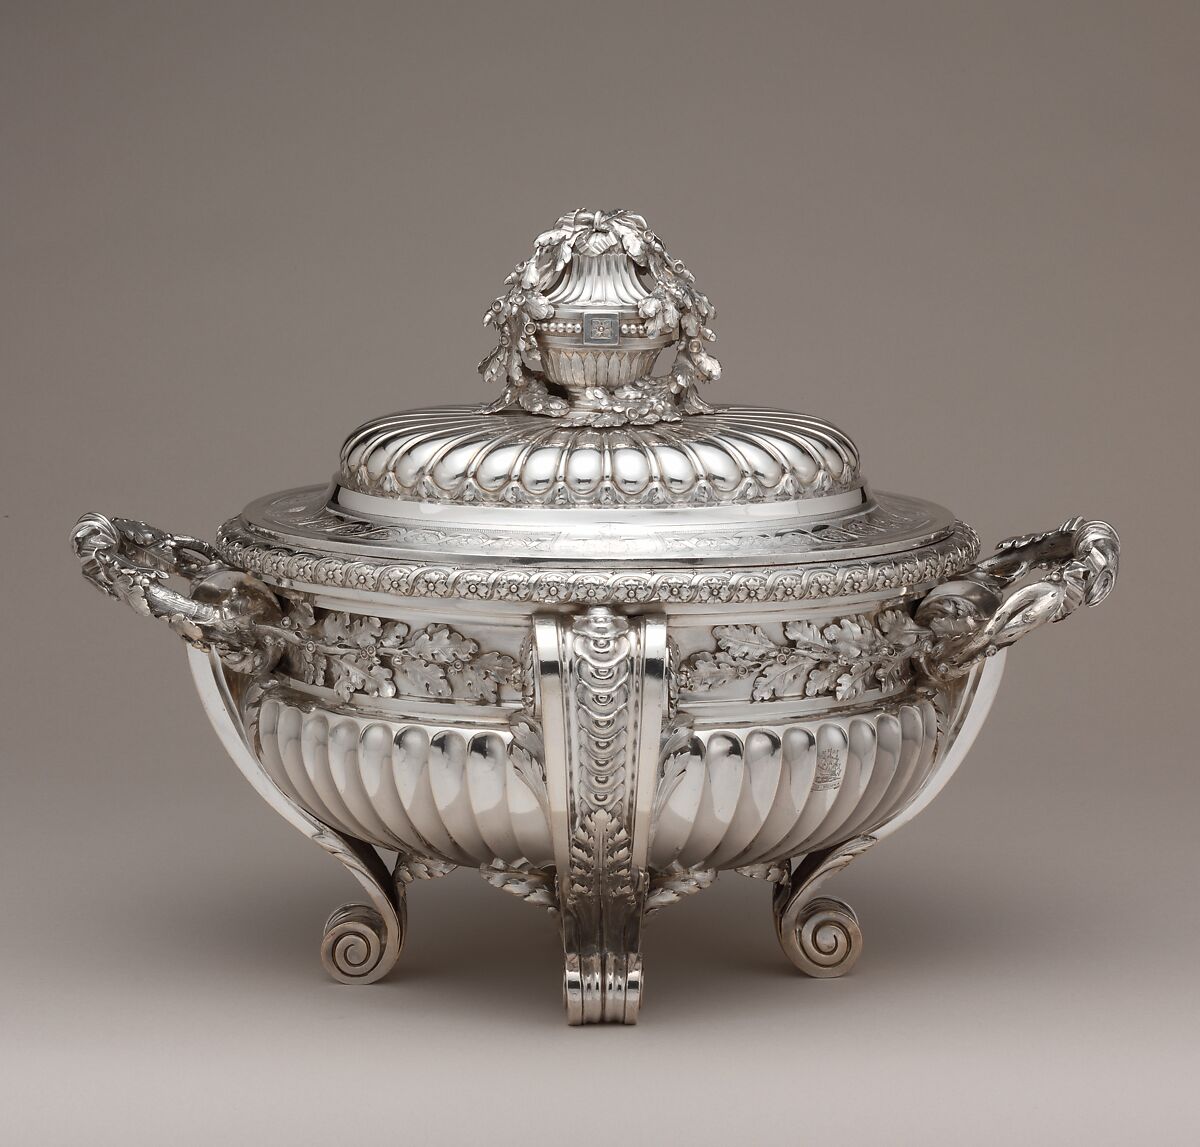 Tureen with cover, Jacques-Nicolas Roettiers, Silver, French, Paris